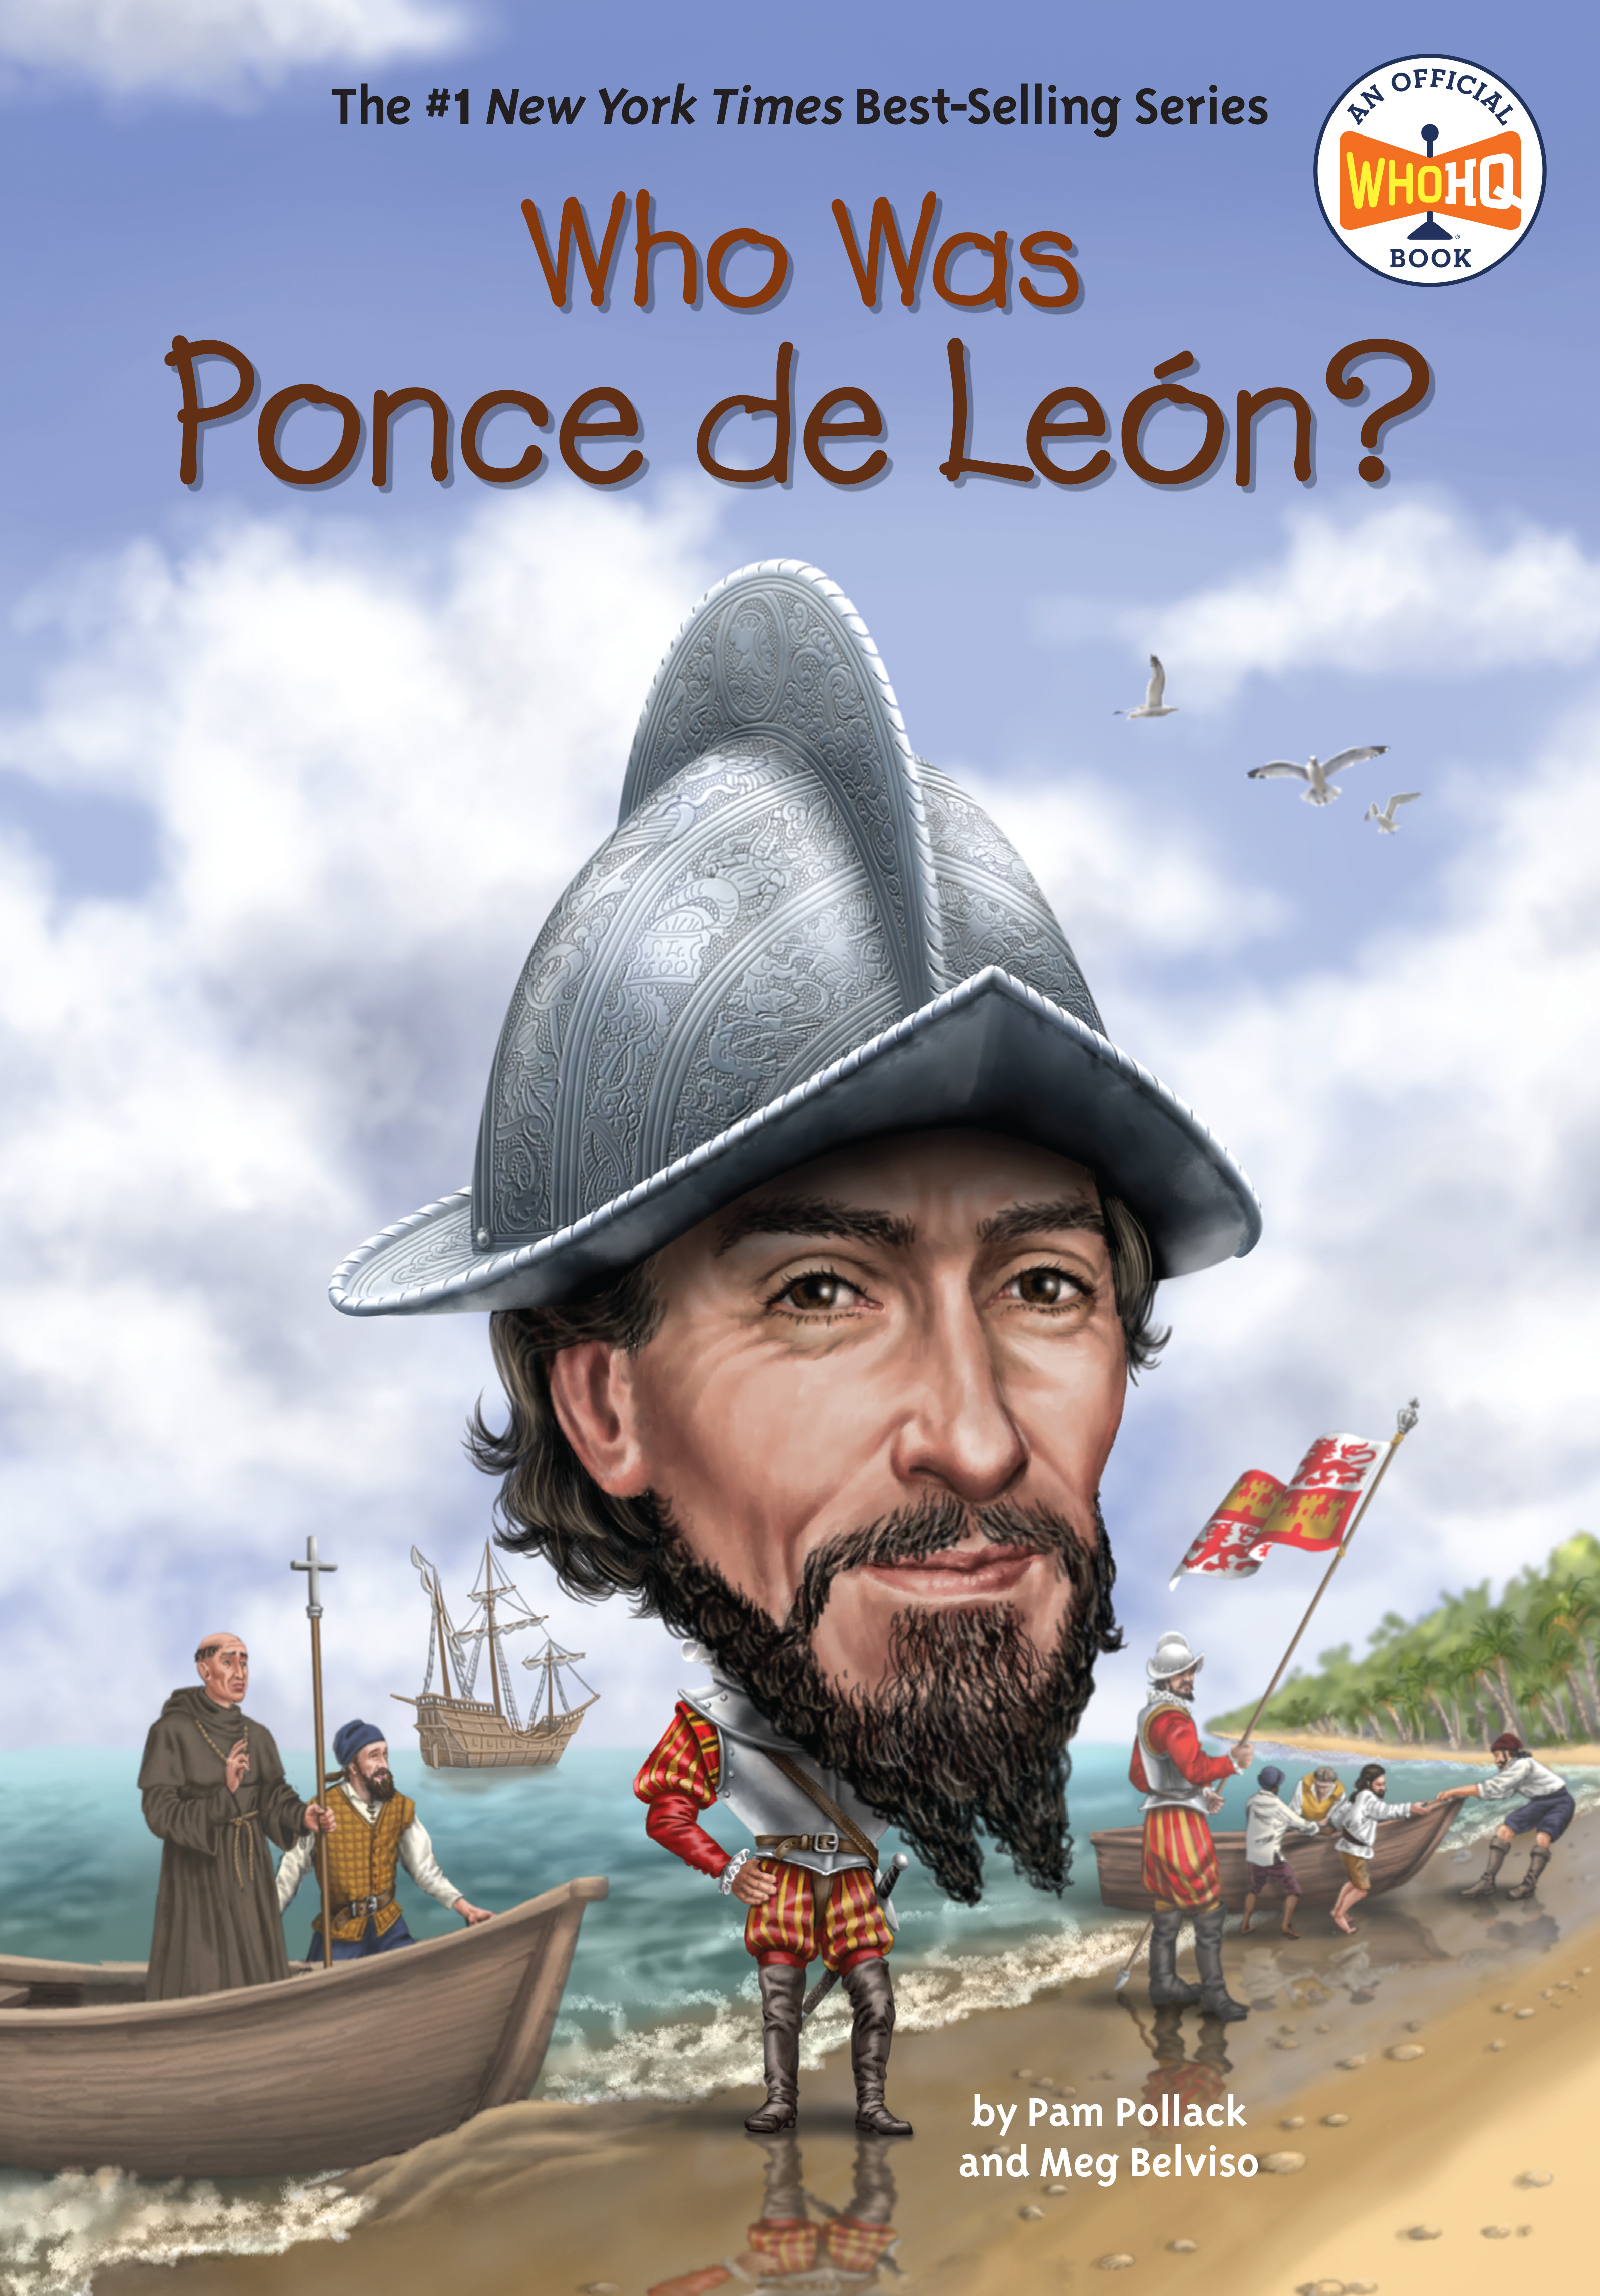 Who Was? - Who Was Ponce de León? | Documentary